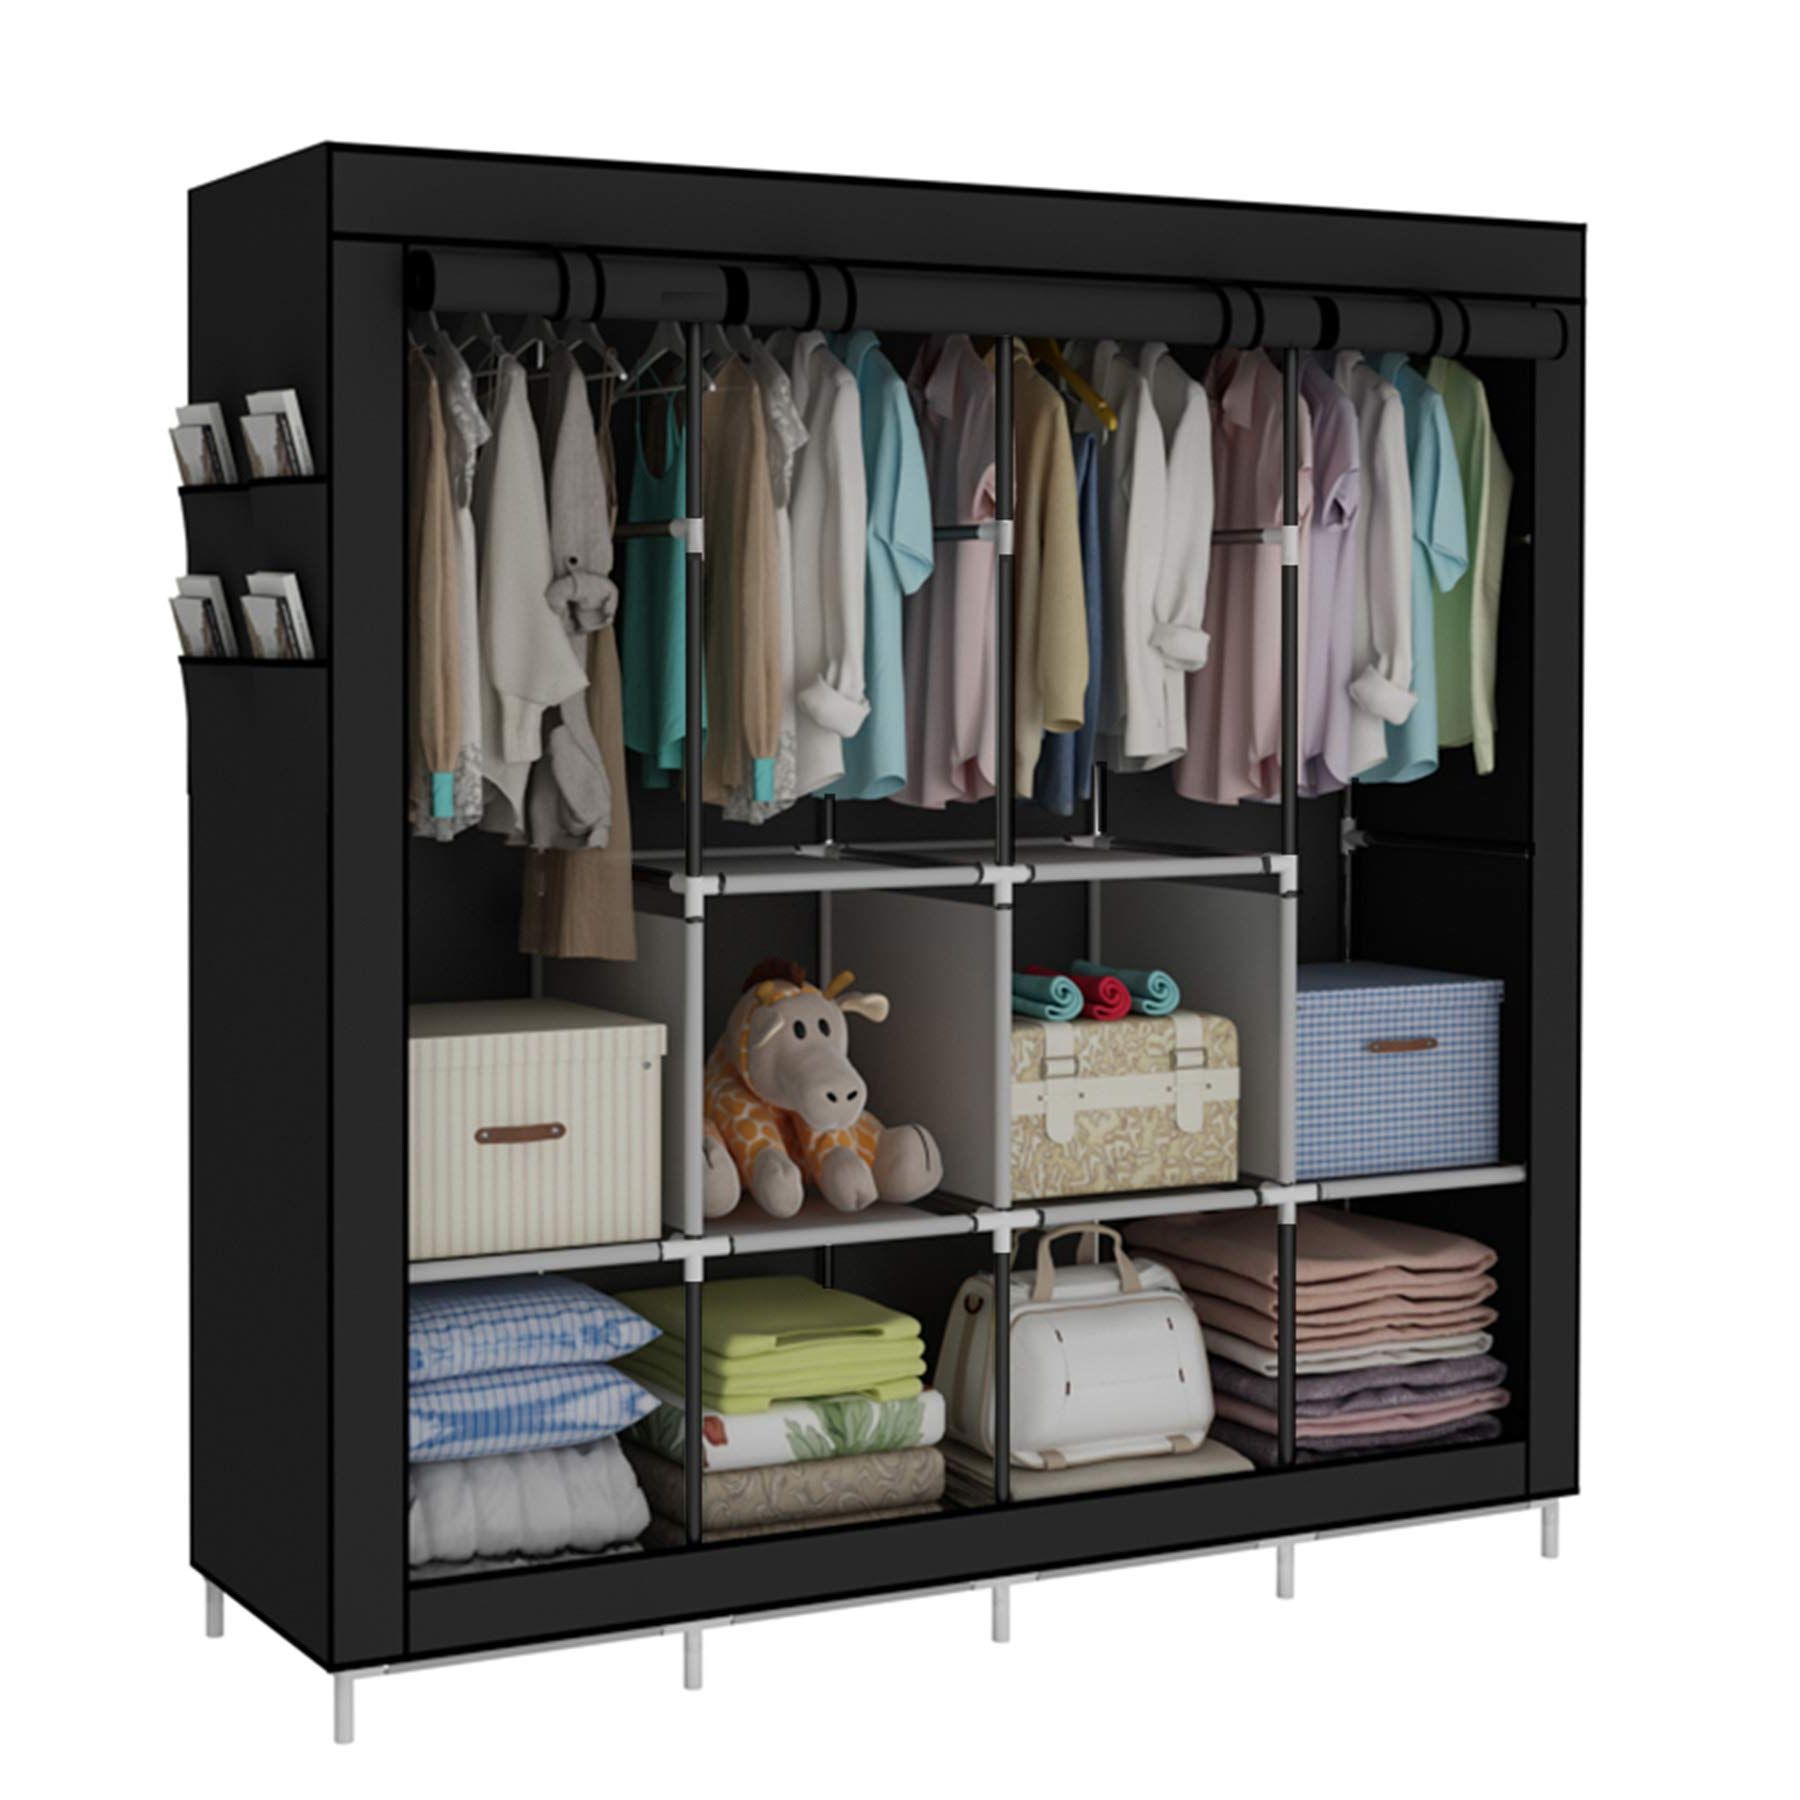 Wardrobes With Shelf Portable Closet For Current Amazon: Accstore Portable Wardrobe Clothing Wardrobe Shelves Clothes  Storage Organiser With 4 Hanging Rail,black : Home & Kitchen (View 3 of 10)